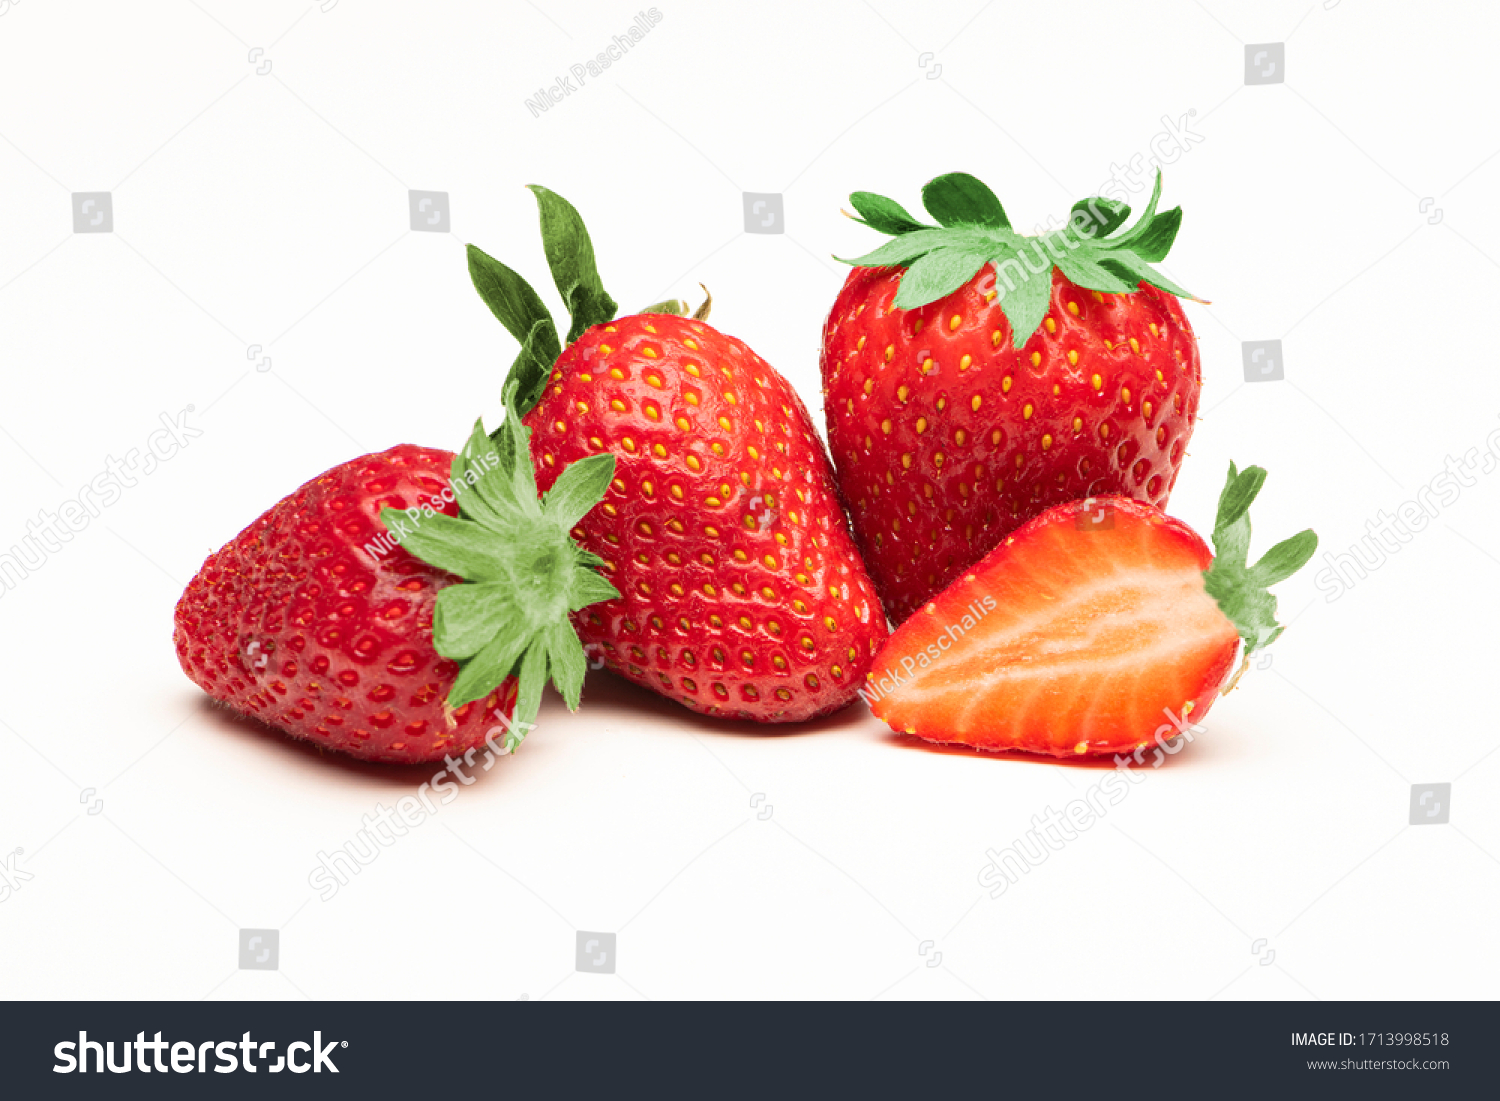 Fresh, red and tasty strawberries isolated on a white background #1713998518